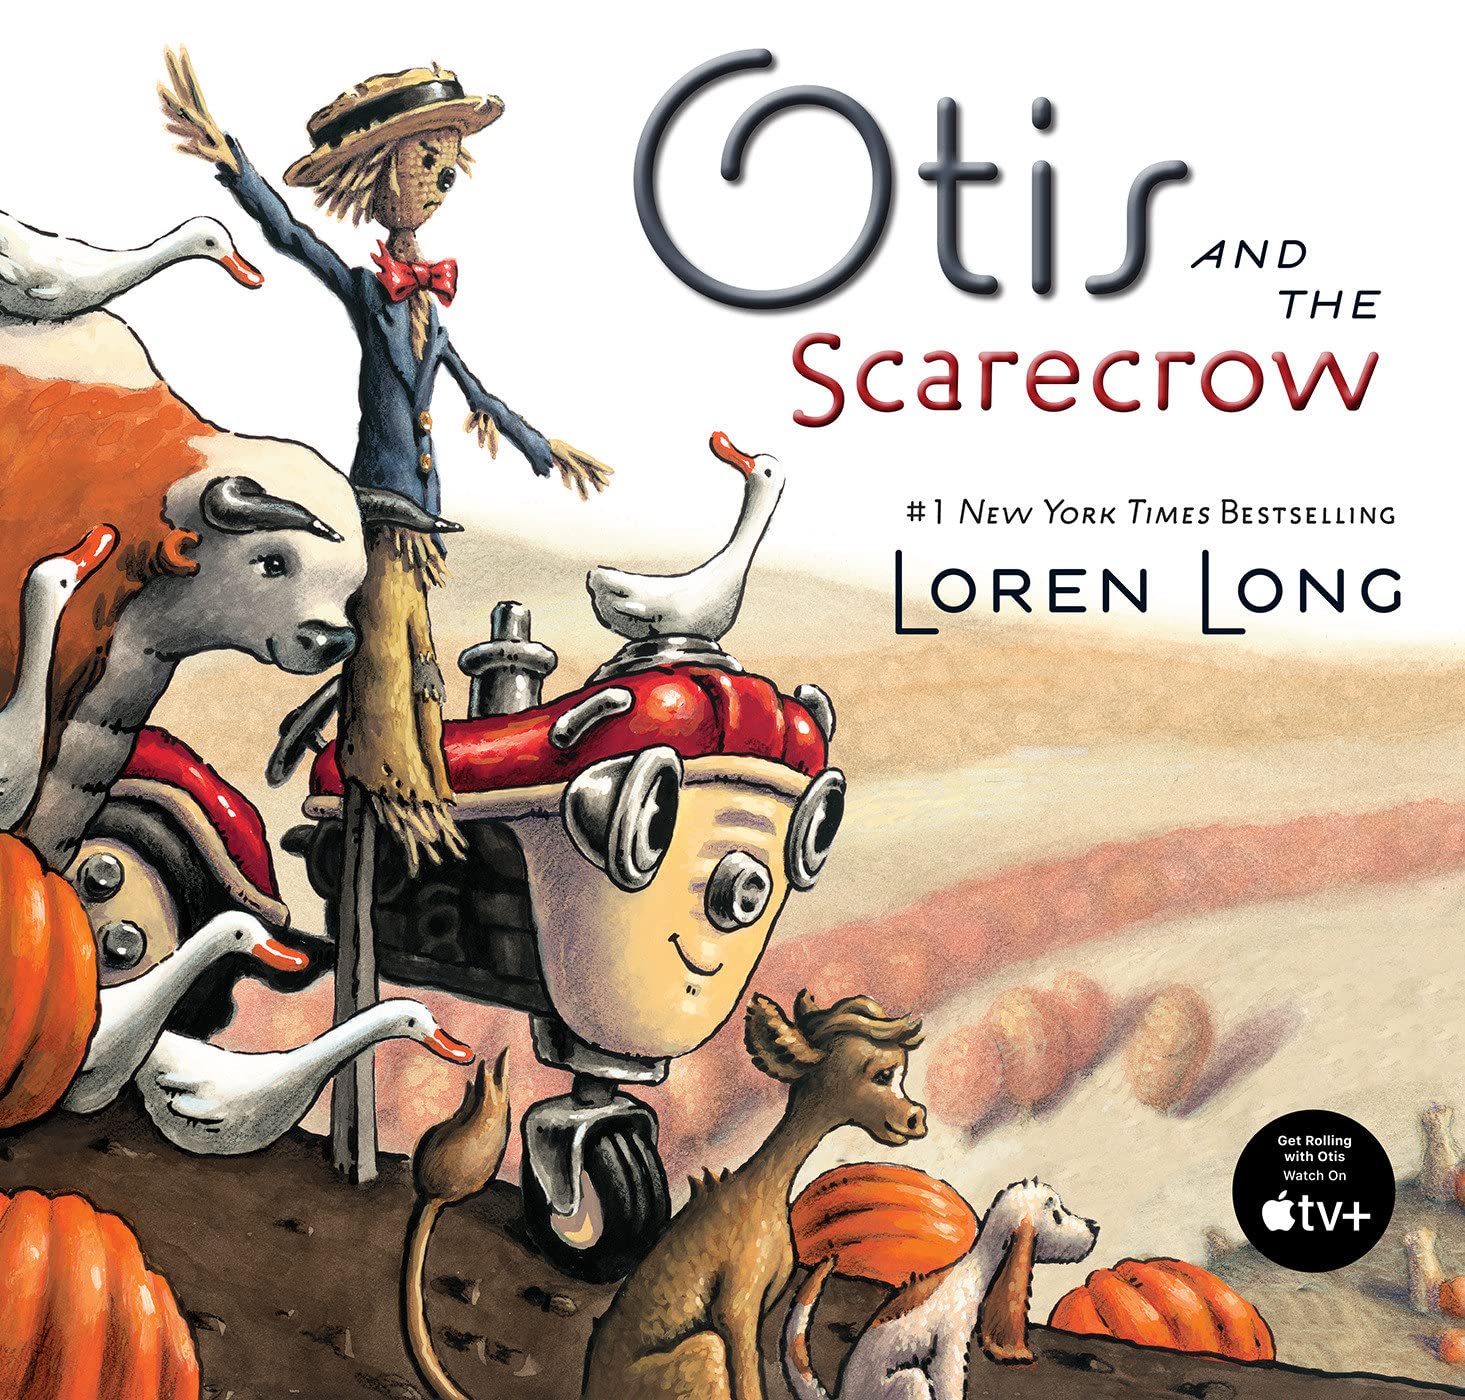 speech and language teaching concepts for Otis and the Scarecrow in speech therapy​ ​